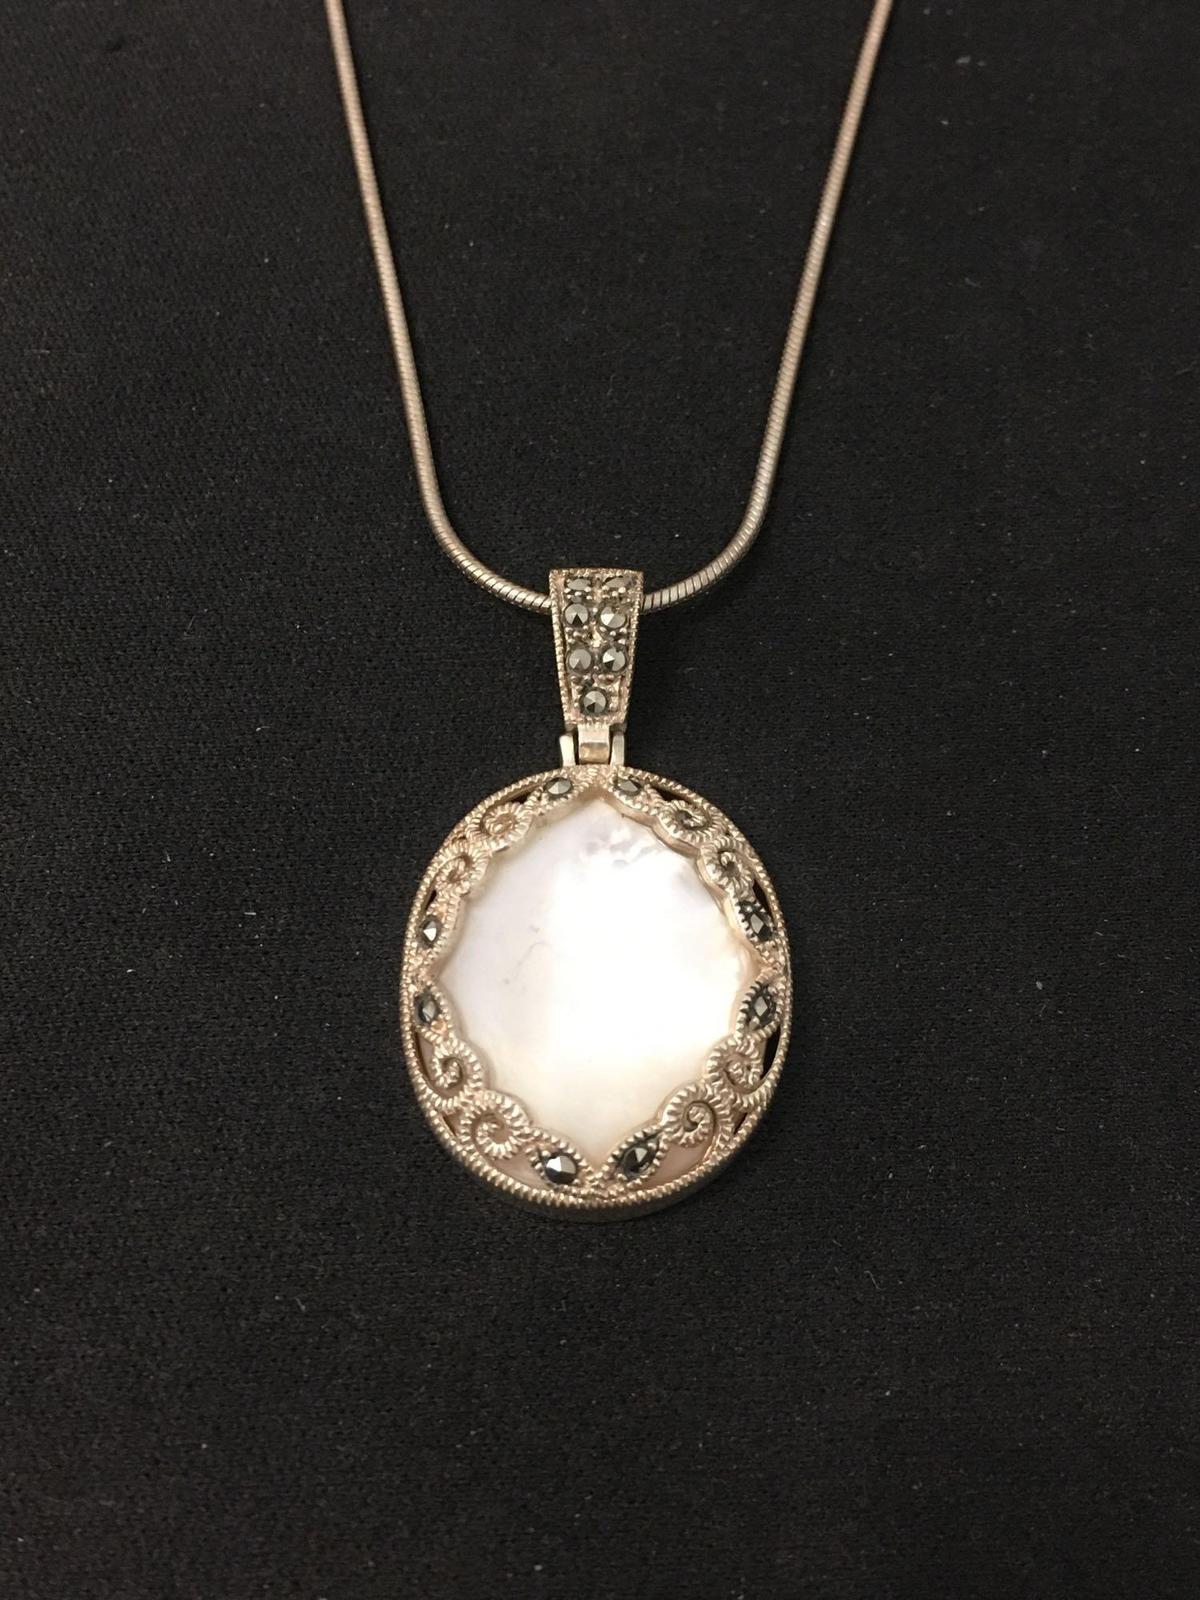 Oval Mother of Pearl Inlaid 1" Milgrain Marcasite Framed Vintage Sterling Silver Pendant & 18" Chain